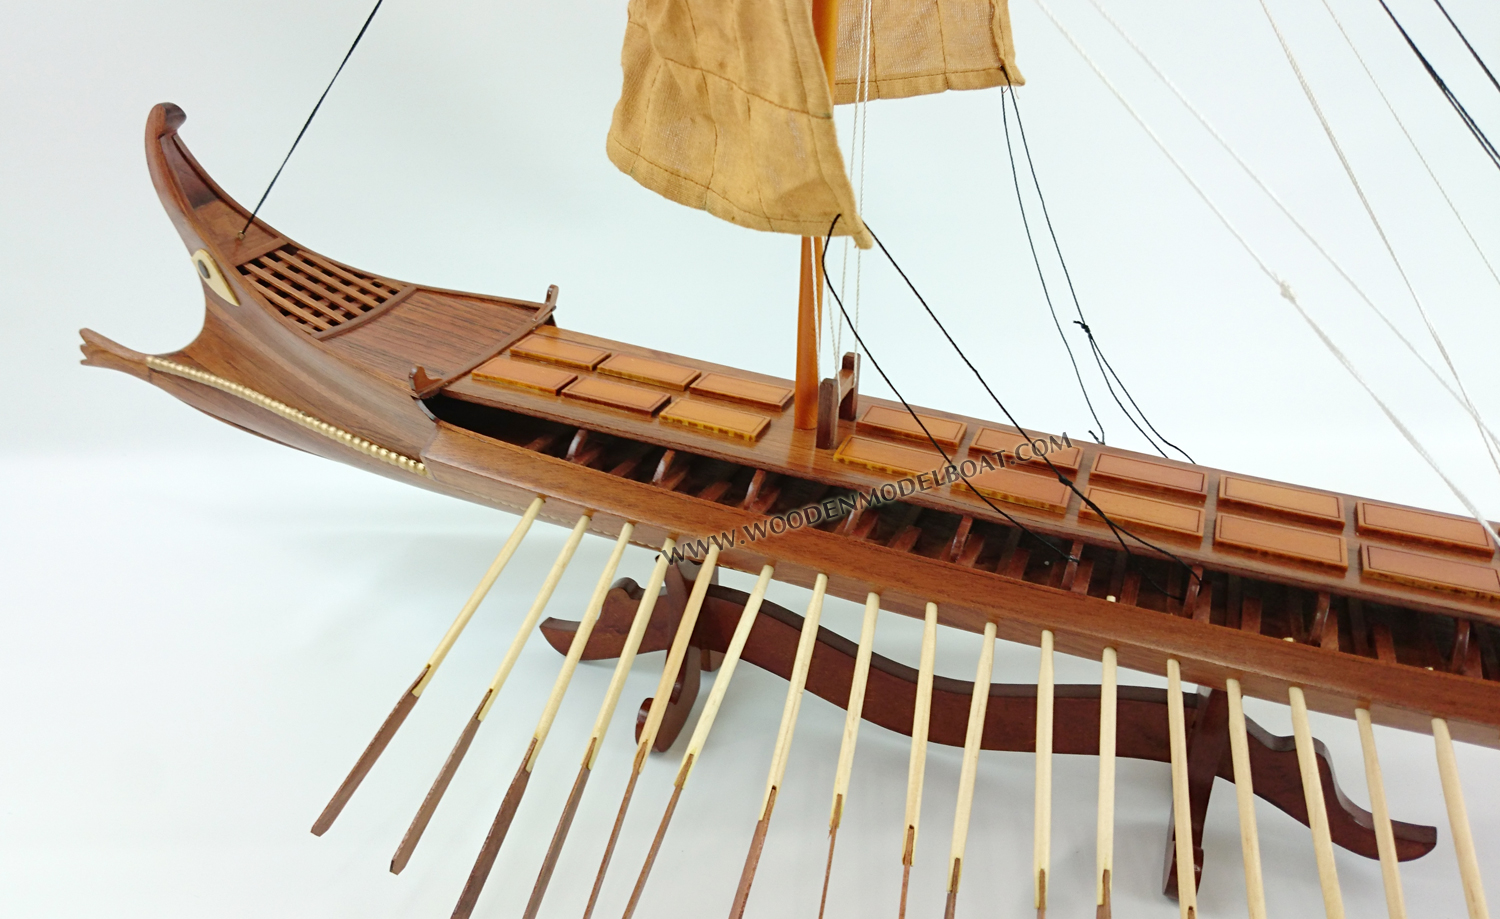 Bireme, ship with two series of oars in each side, was the precursor of trireme and forms the in-between link evolution from pentikoro to subsequent ships. Biremes were made with thirty or fifty oars and the dimensions of these ships are between: 18-22m length, 3-4 m width, 22 tones displacement and the length of the oars 4-6 m. The most famous biremes were made in Samos from tyrant Polykrates and were named samaines. It was a special type of biremes, made in such a way so that could be used as a tanker and as a battle ship in the same time. For greater stability of the ship the Phoenicians lowered the crinolines (platforms where oarsmen sat). A massive bronze covered battering ram was the main weapon of this narrow high speed bireme. The traditional removable rig was typical. A decorative poop extremity of stern was abruptly bent, similarly to a tail of a scorpion, and the balustrade of the battle platform was covered with the shields of warriors for reinforcement. Phoenicians were considered as the best seamen of the time and many ancient states frequently used them as mercenaries. The bireme displayed is an in-between type made in 450 B. C. The first battle samaines were made in Samos in 250-400 B. C. The effigy-model is a pentikontors bireme, which width is up to 4 meters, united deck, powerful ram-beak and big square sail.